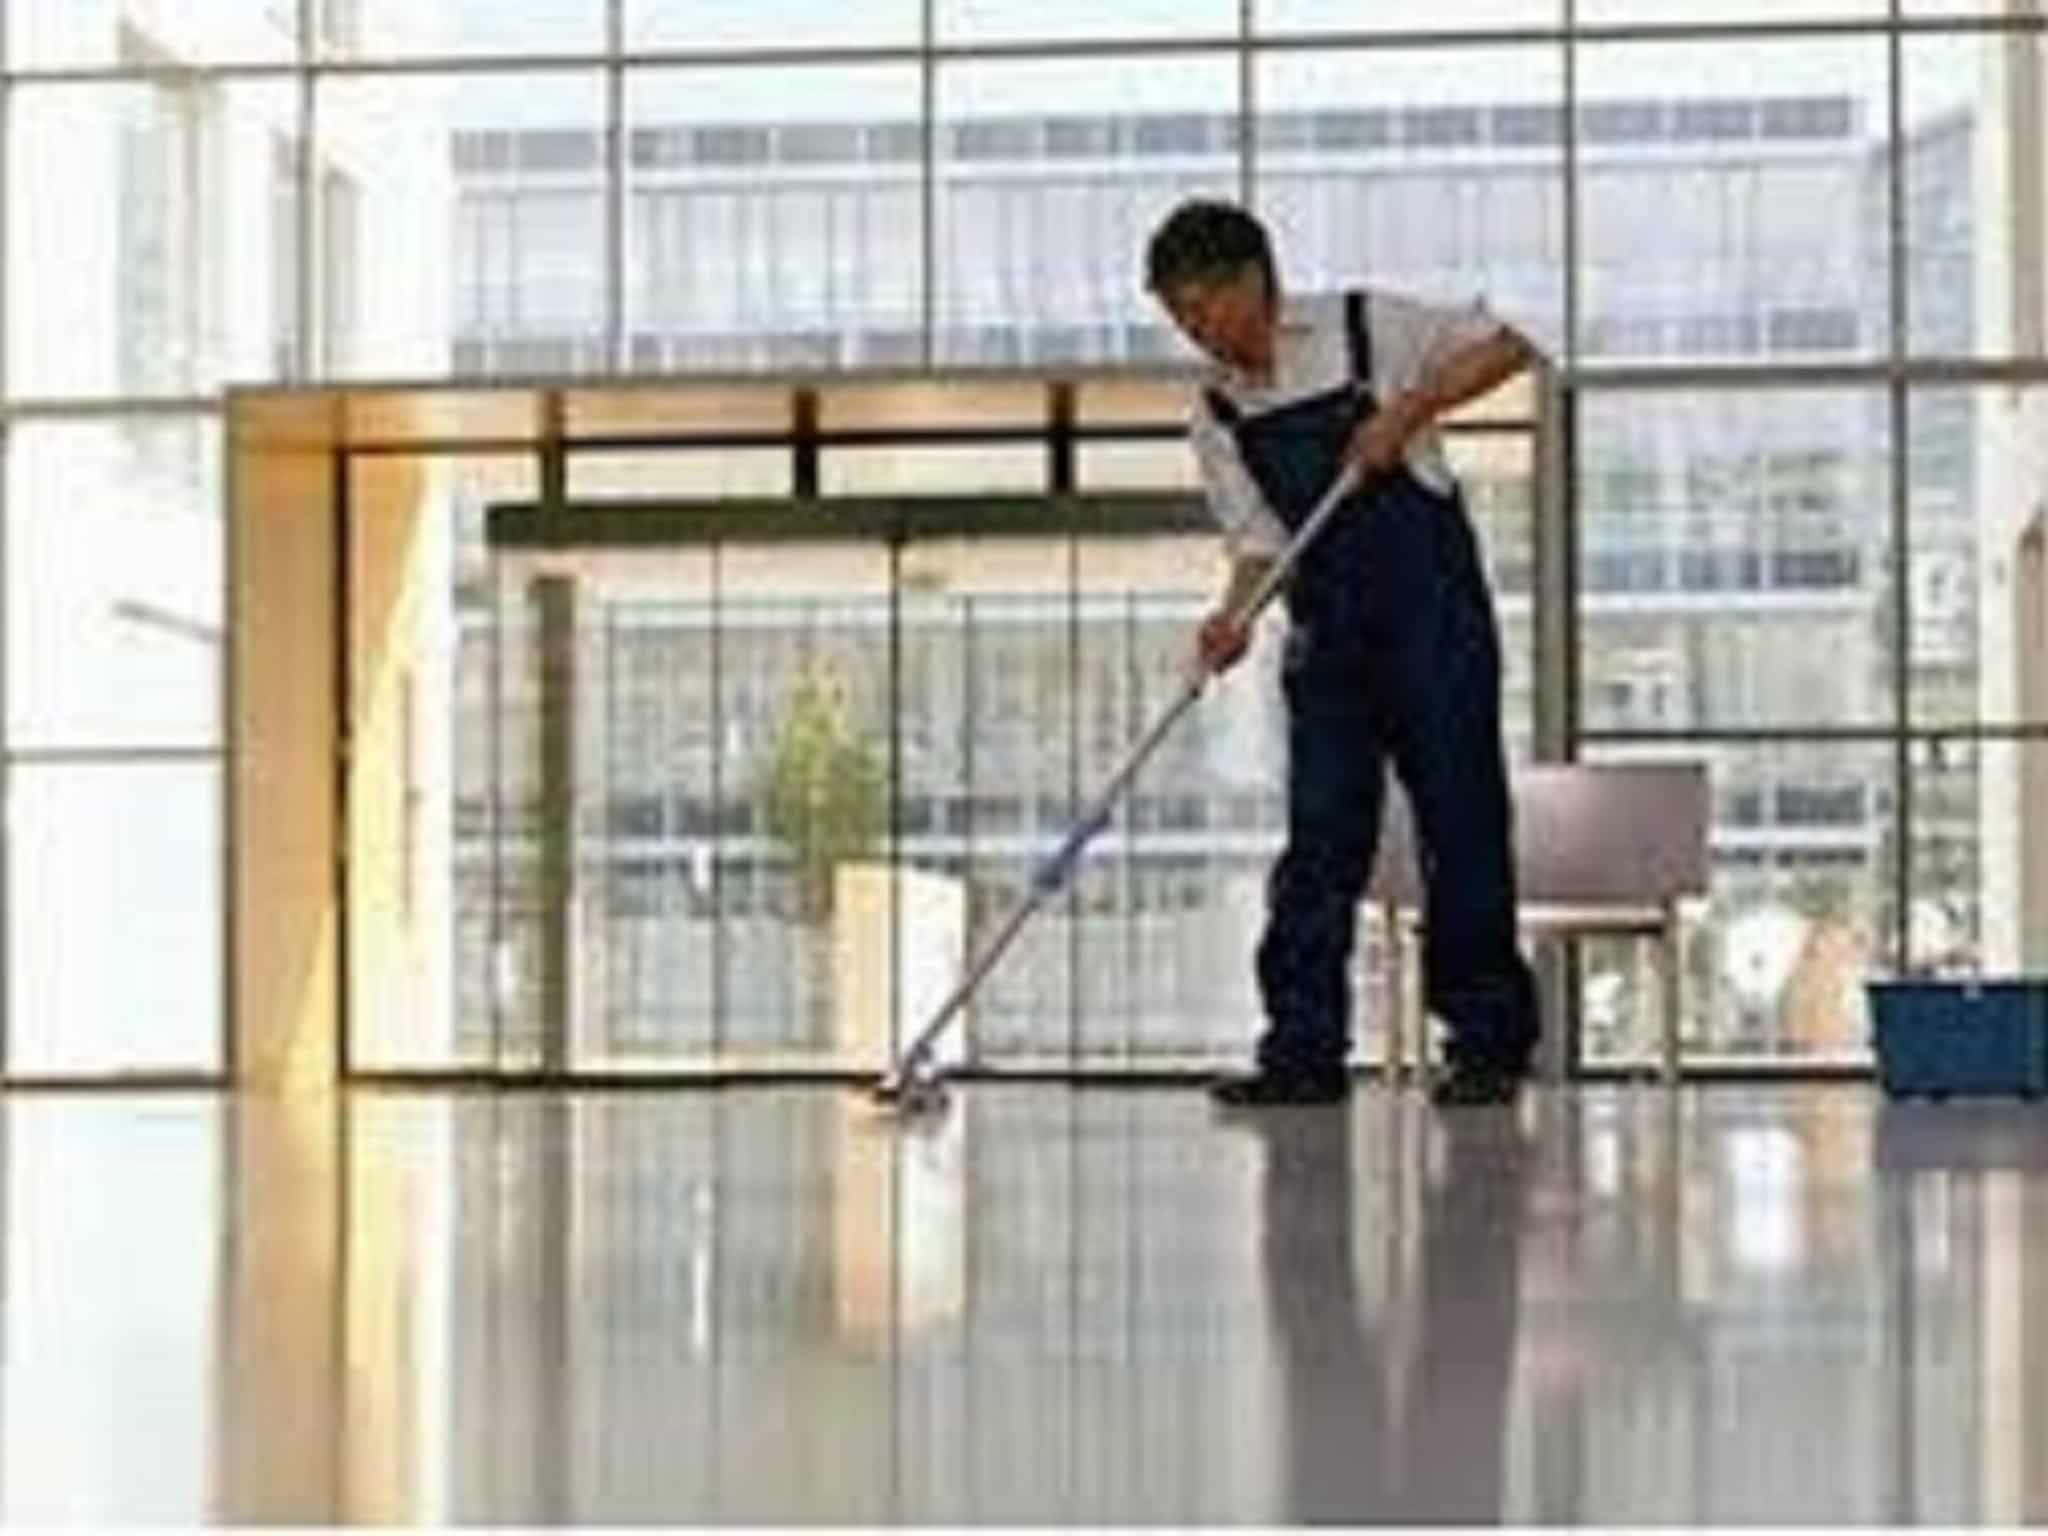 photo C.A.R.E. Commercial Cleaning Services